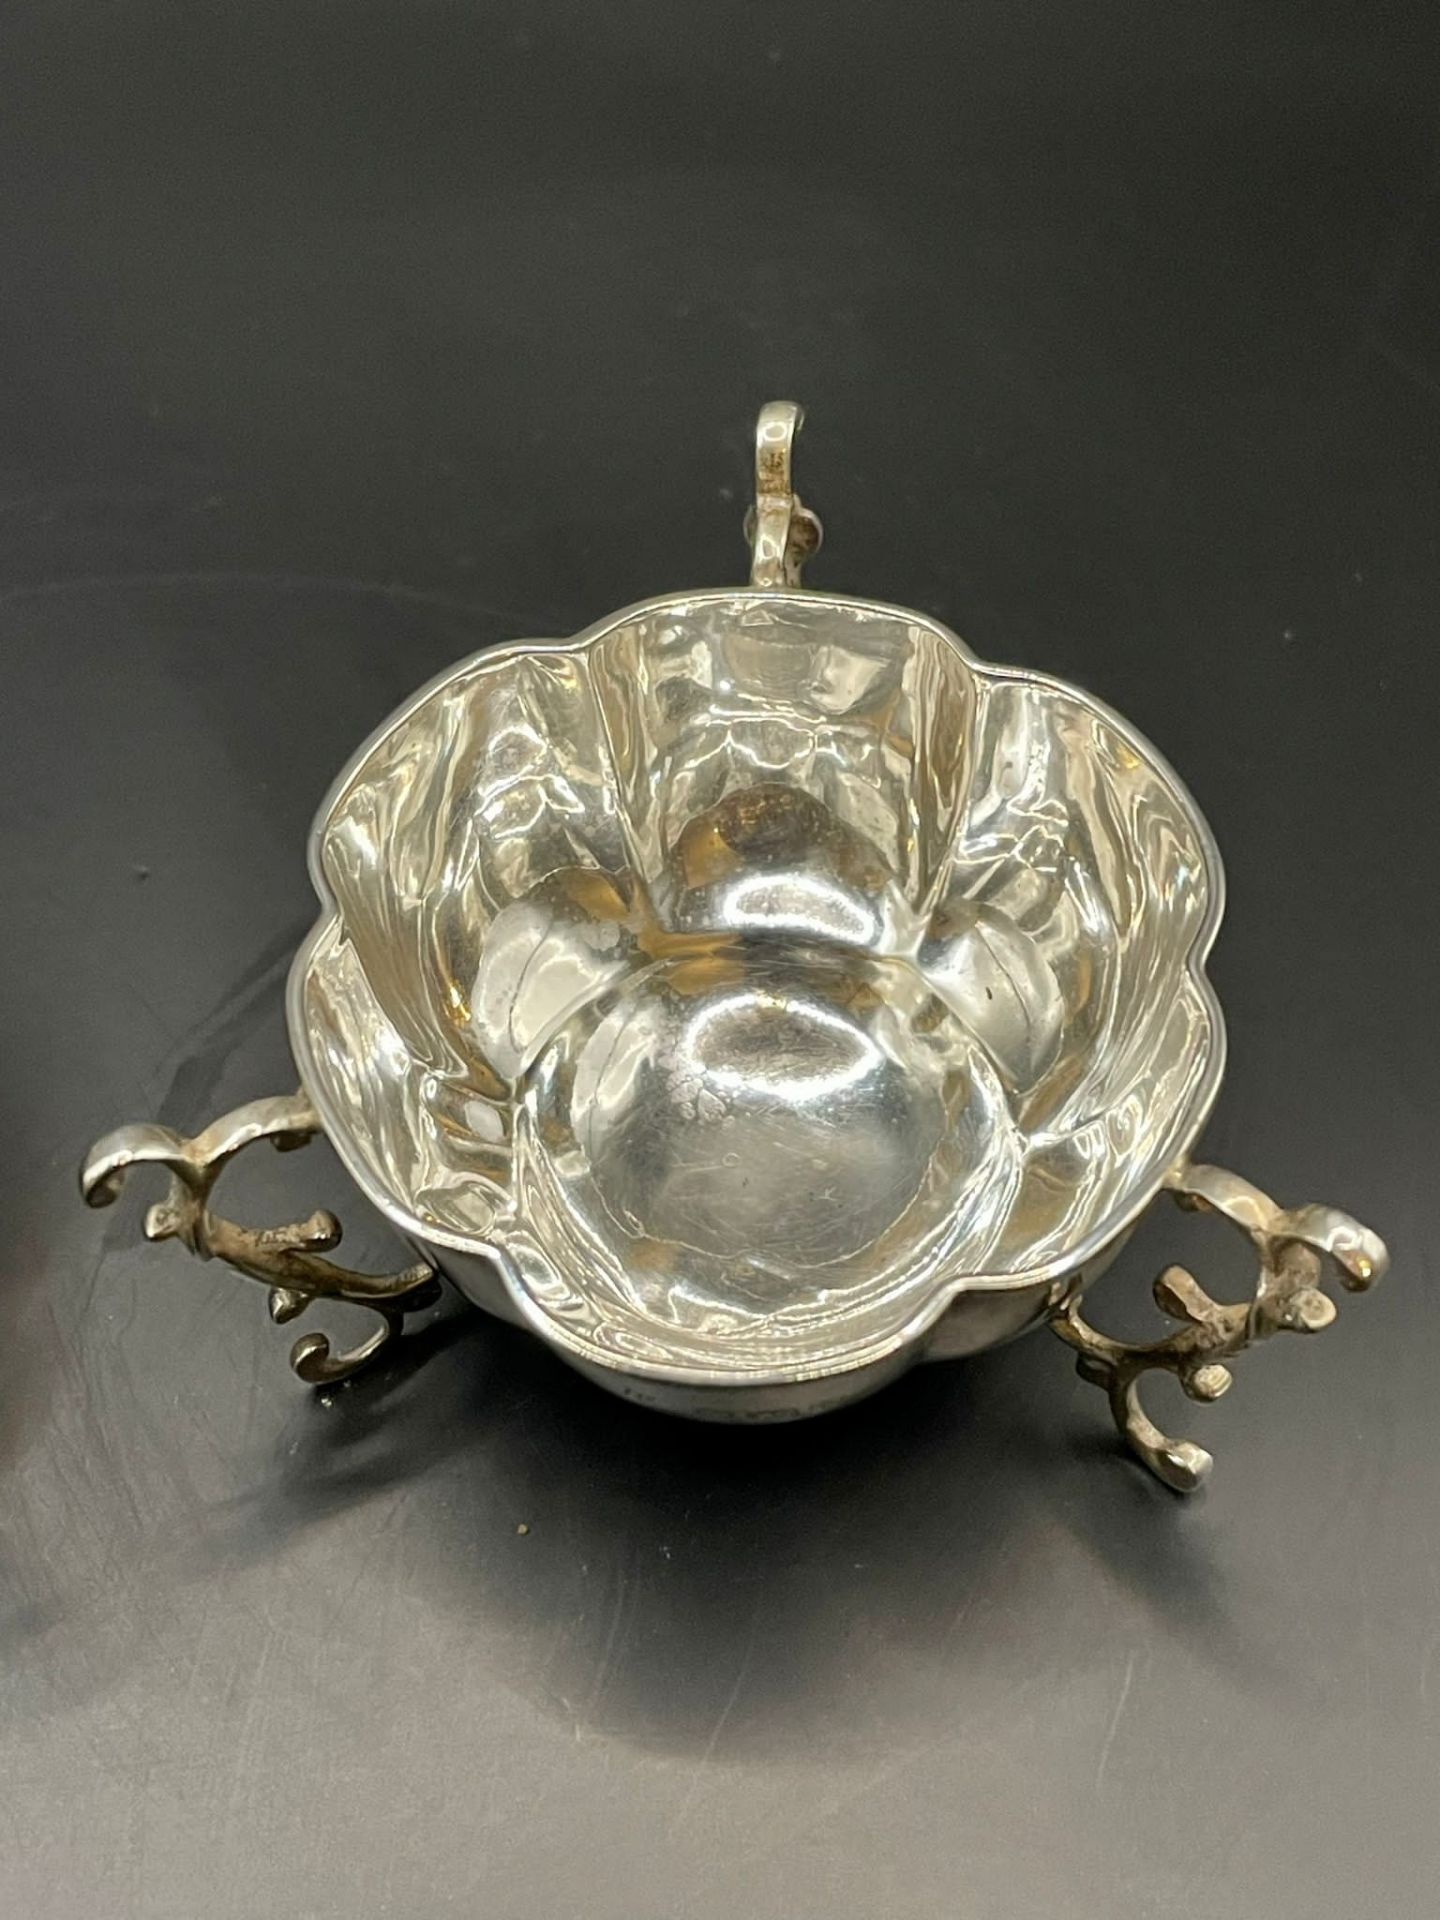 Antique Solid Silver Salt Dishes Fully Hallmarked .- JD over WD in lozenge for James Deakin & Sons J - Image 12 of 15